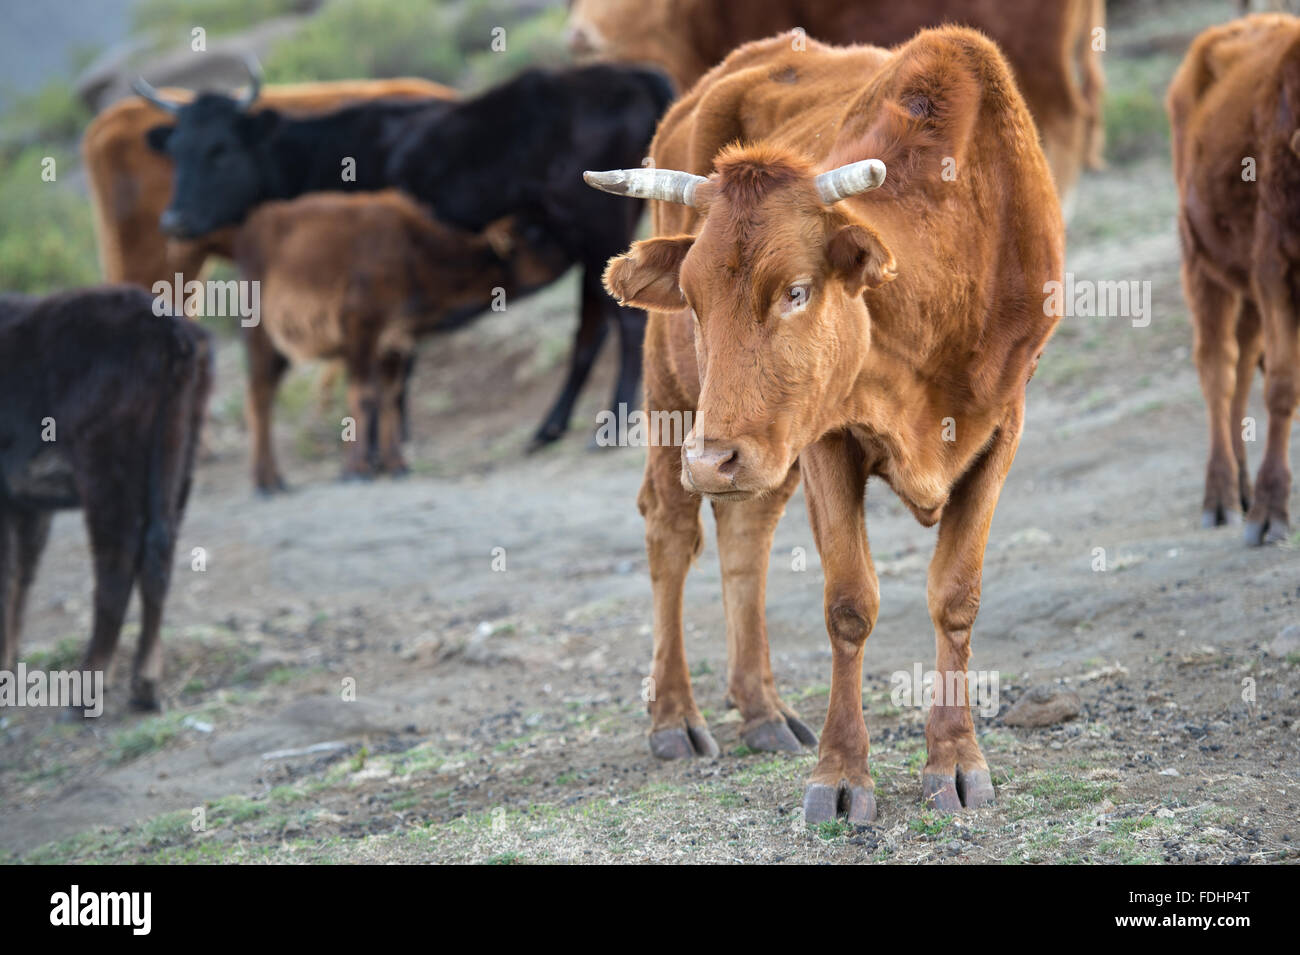 Beef cattle in a village in Lesotho, Africa Stock Photo